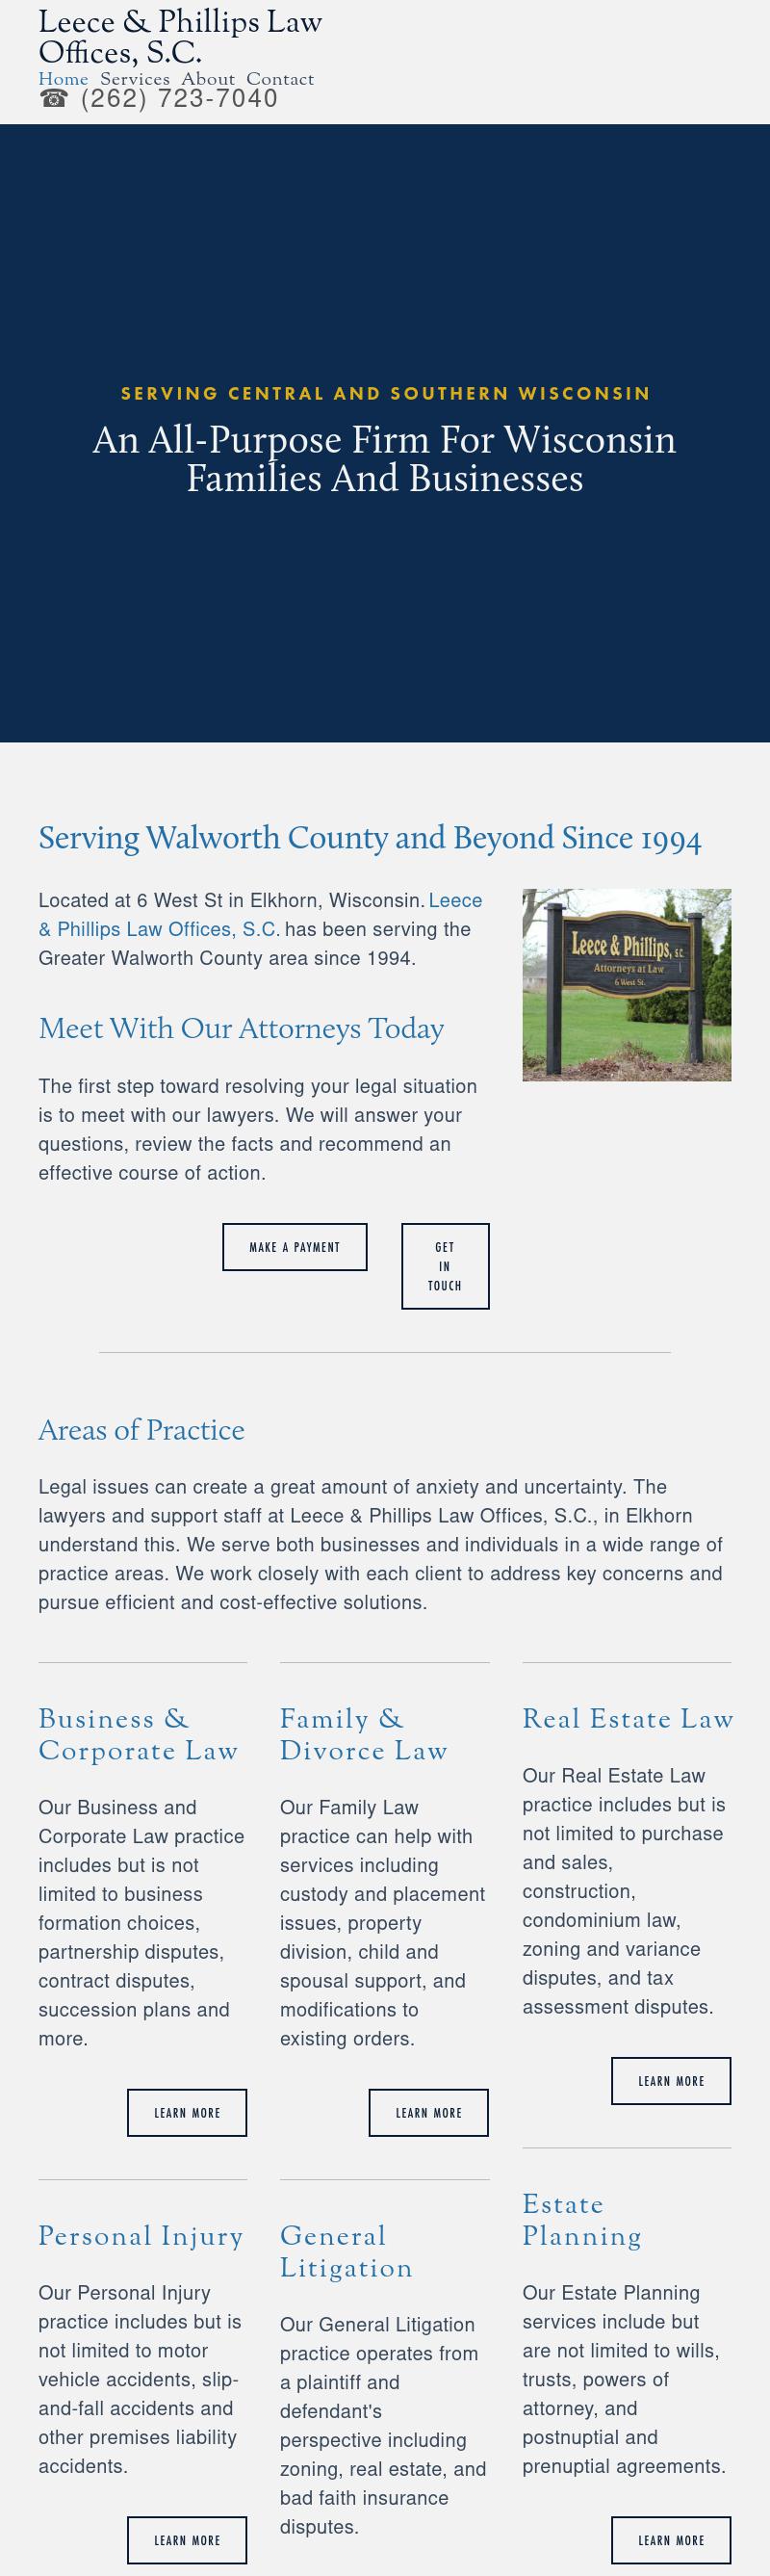 Leece & Phillips Law Offices, S.C. - Elkhorn WI Lawyers